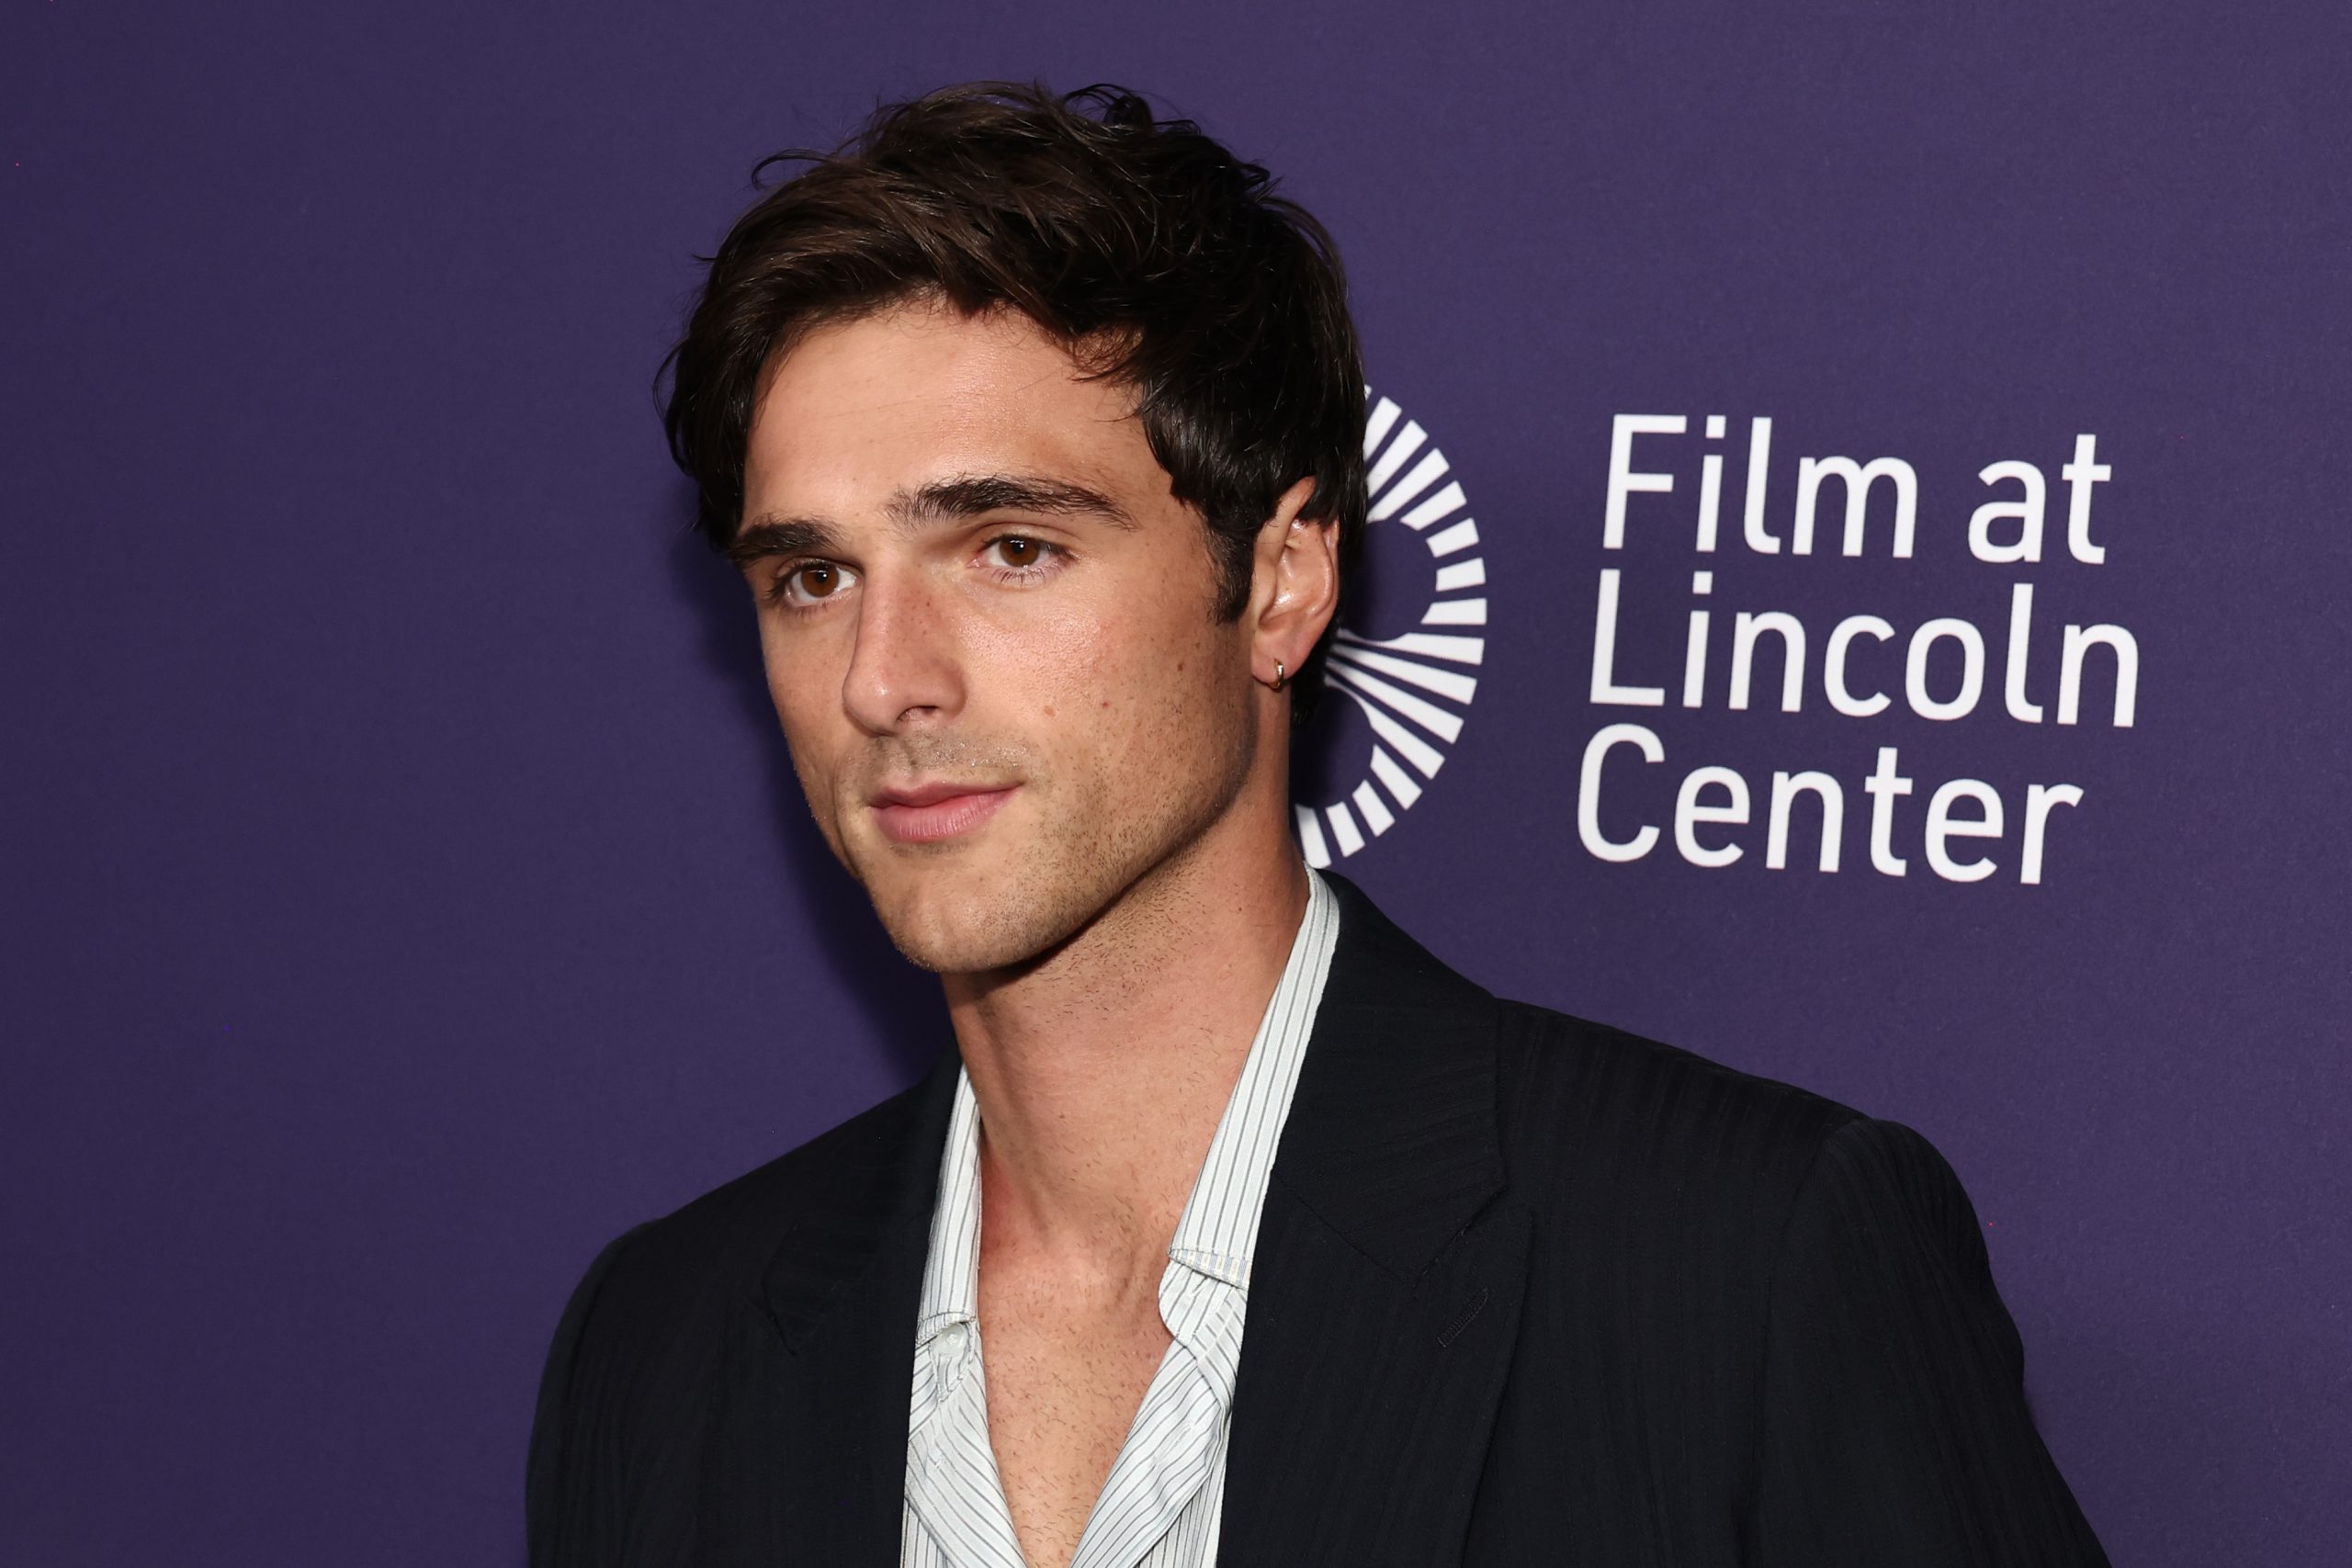 Jacob Elordi Recalls His Excitement About Meeting Paul Schrader: ‘The Little Kid That Goes to the Cinema in Me Was Freaking Out’